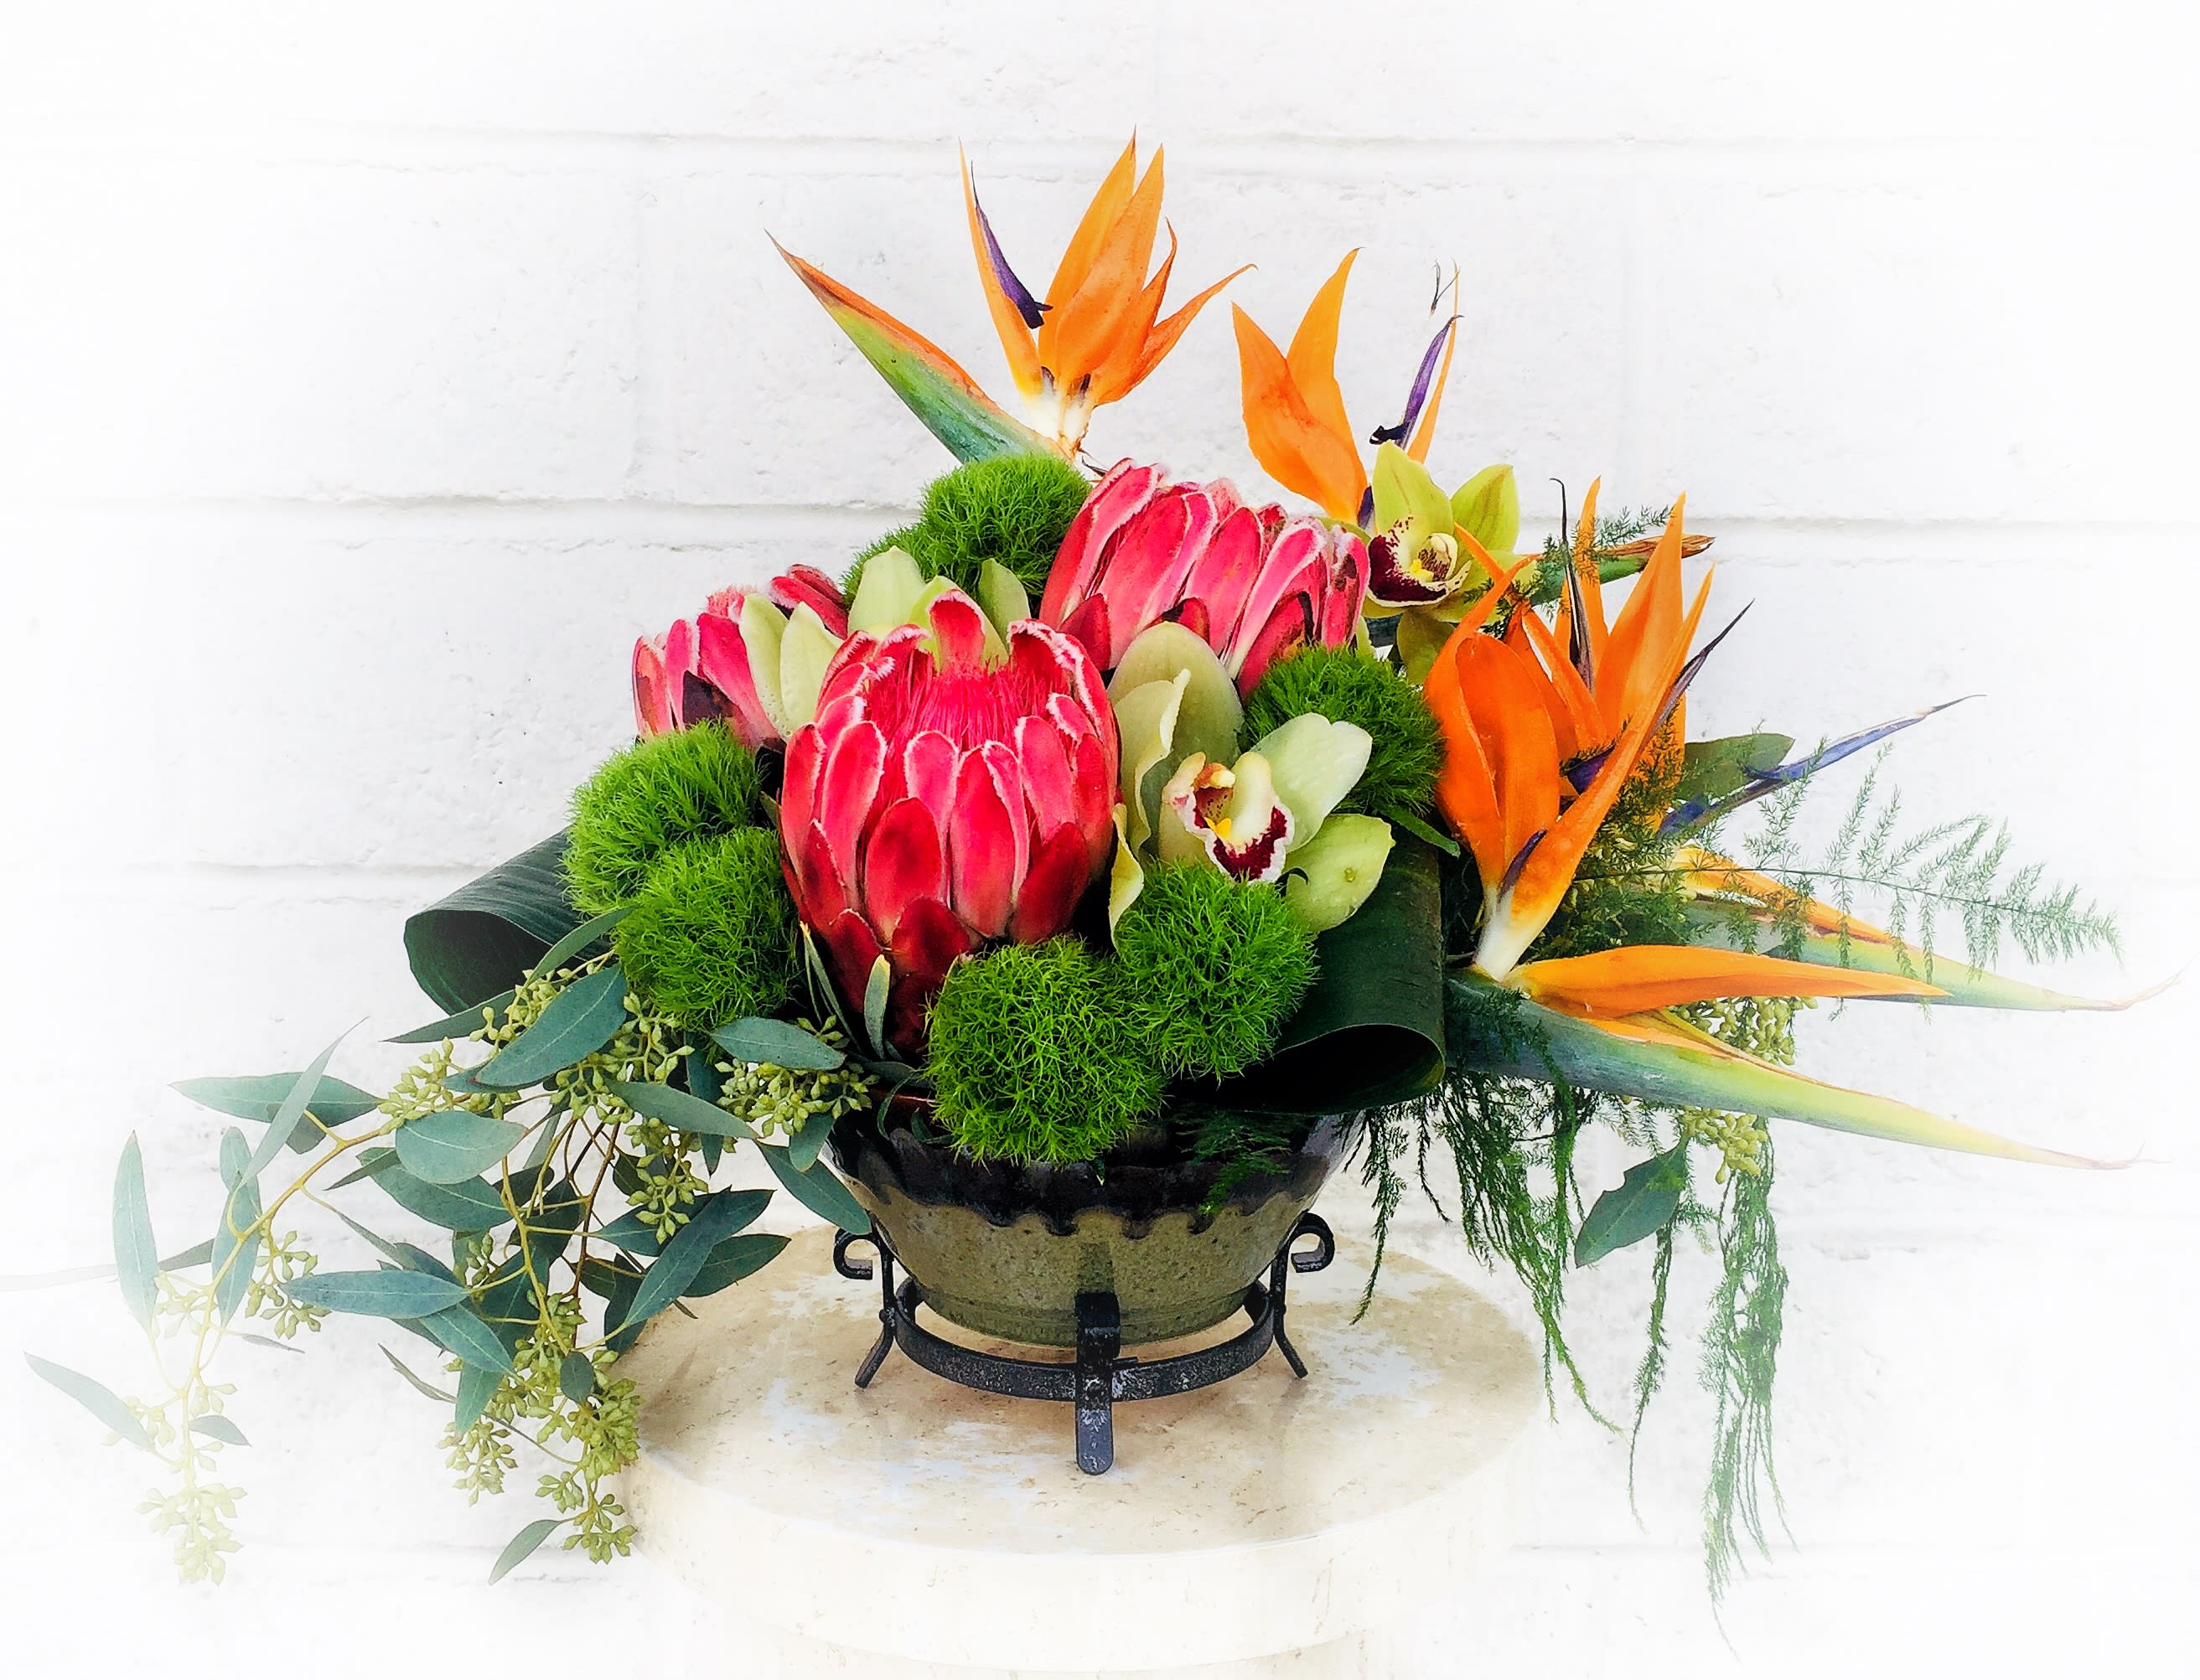 Heaven on Earth - Exotic design including protea, cymbidium orchid, bird of paradise, green balls and greens in a designed ceramic container. Dimensions: 12&quot; H x 13&quot; L STANDARD: FIRST PHOTO DELUXE: SECOND PHOTO PREMIUM: THIRD PHOTO